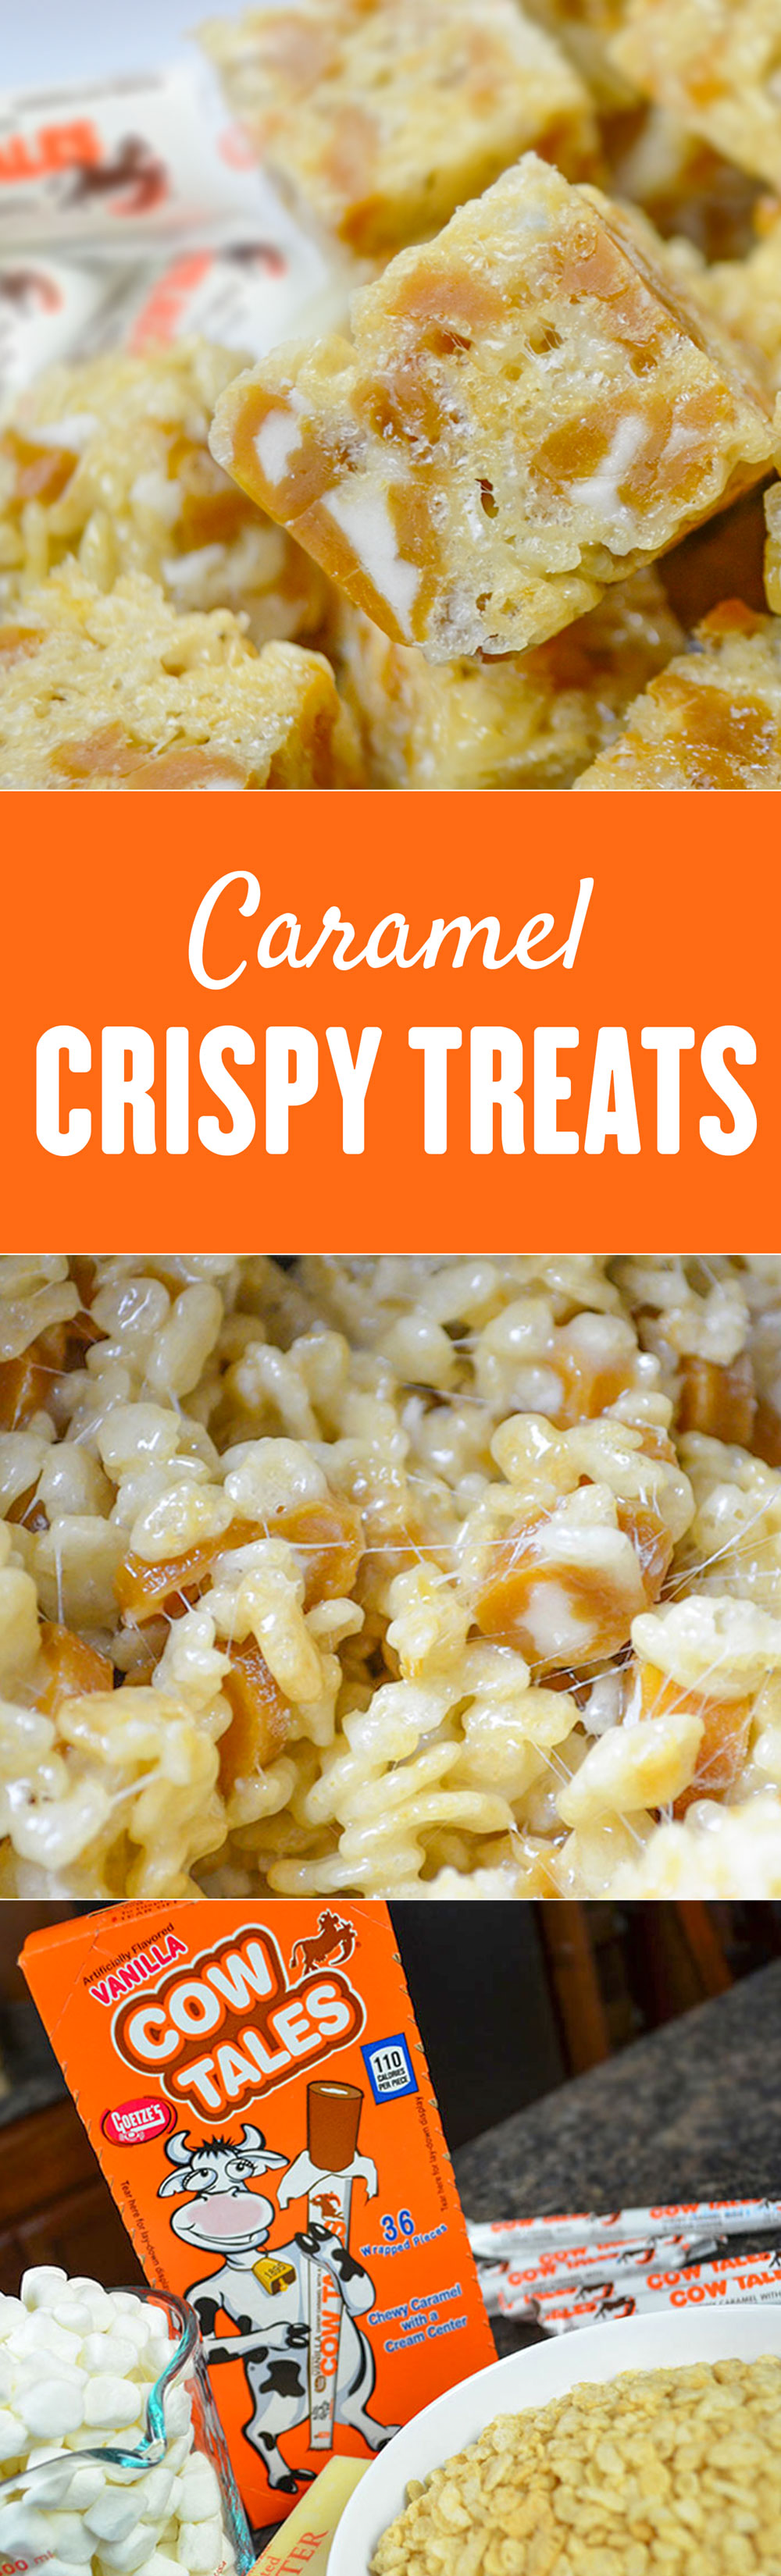 THE BEST homemade crispy treats with bits of caramel. Bet you can't have just one! Cow Tales crispy treats recipe...